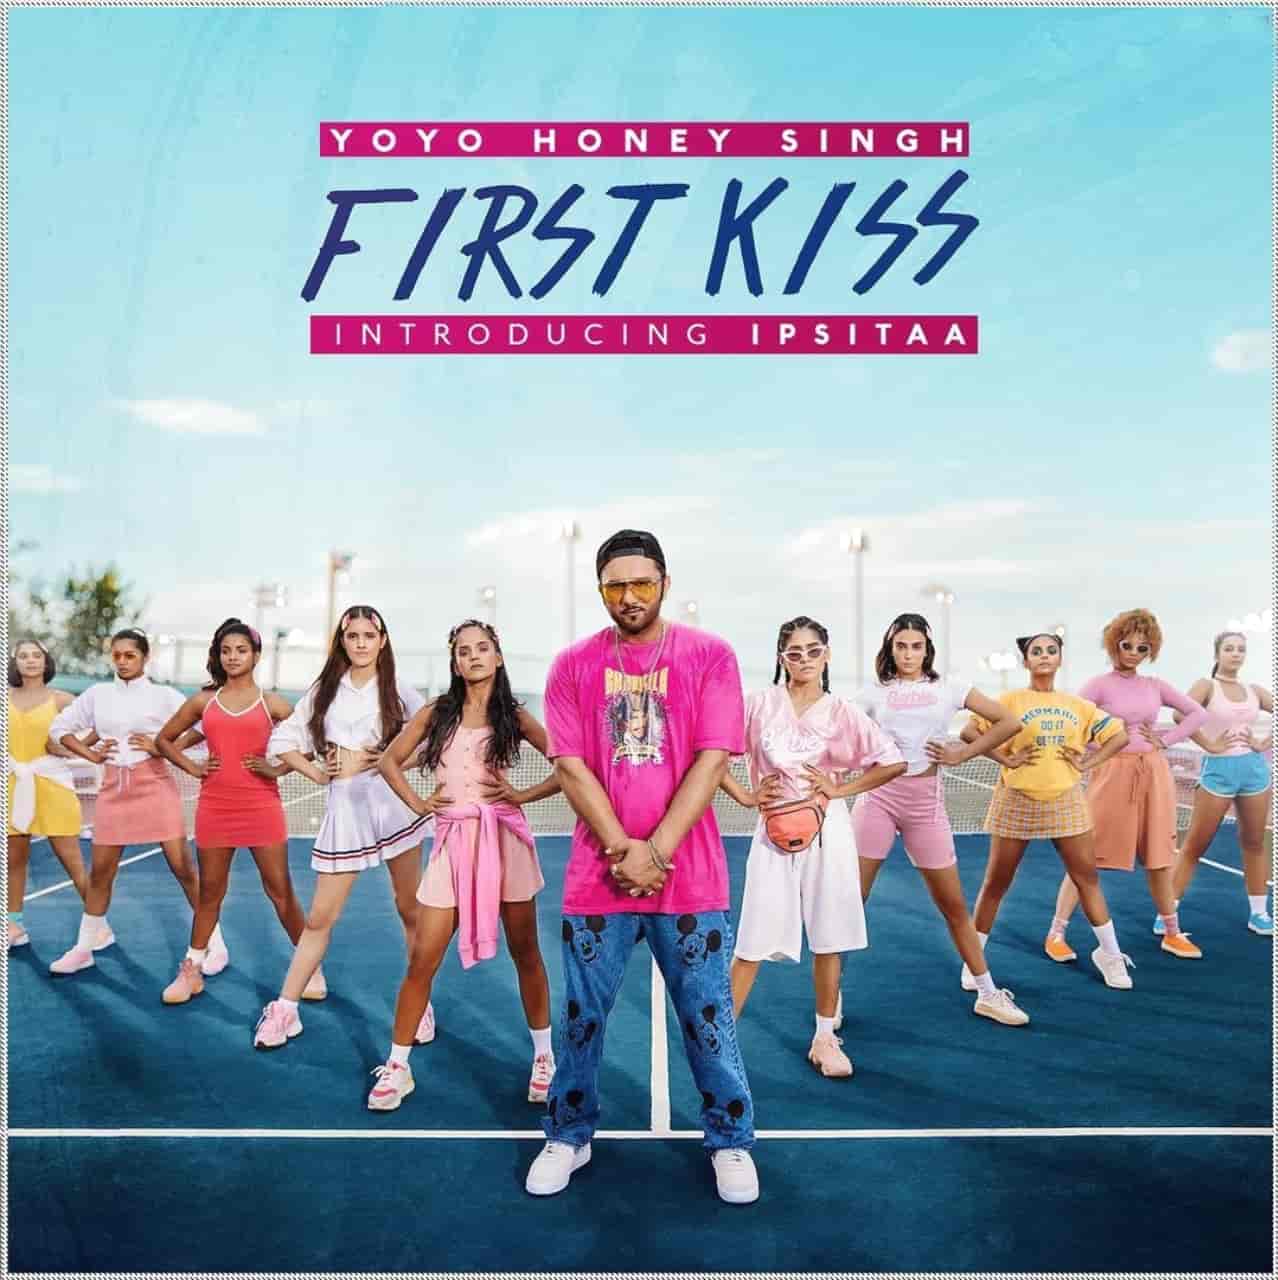 FIRST KISS RAP SONG IMAGE FEATURES HONEY SINGH AND IPSITAA